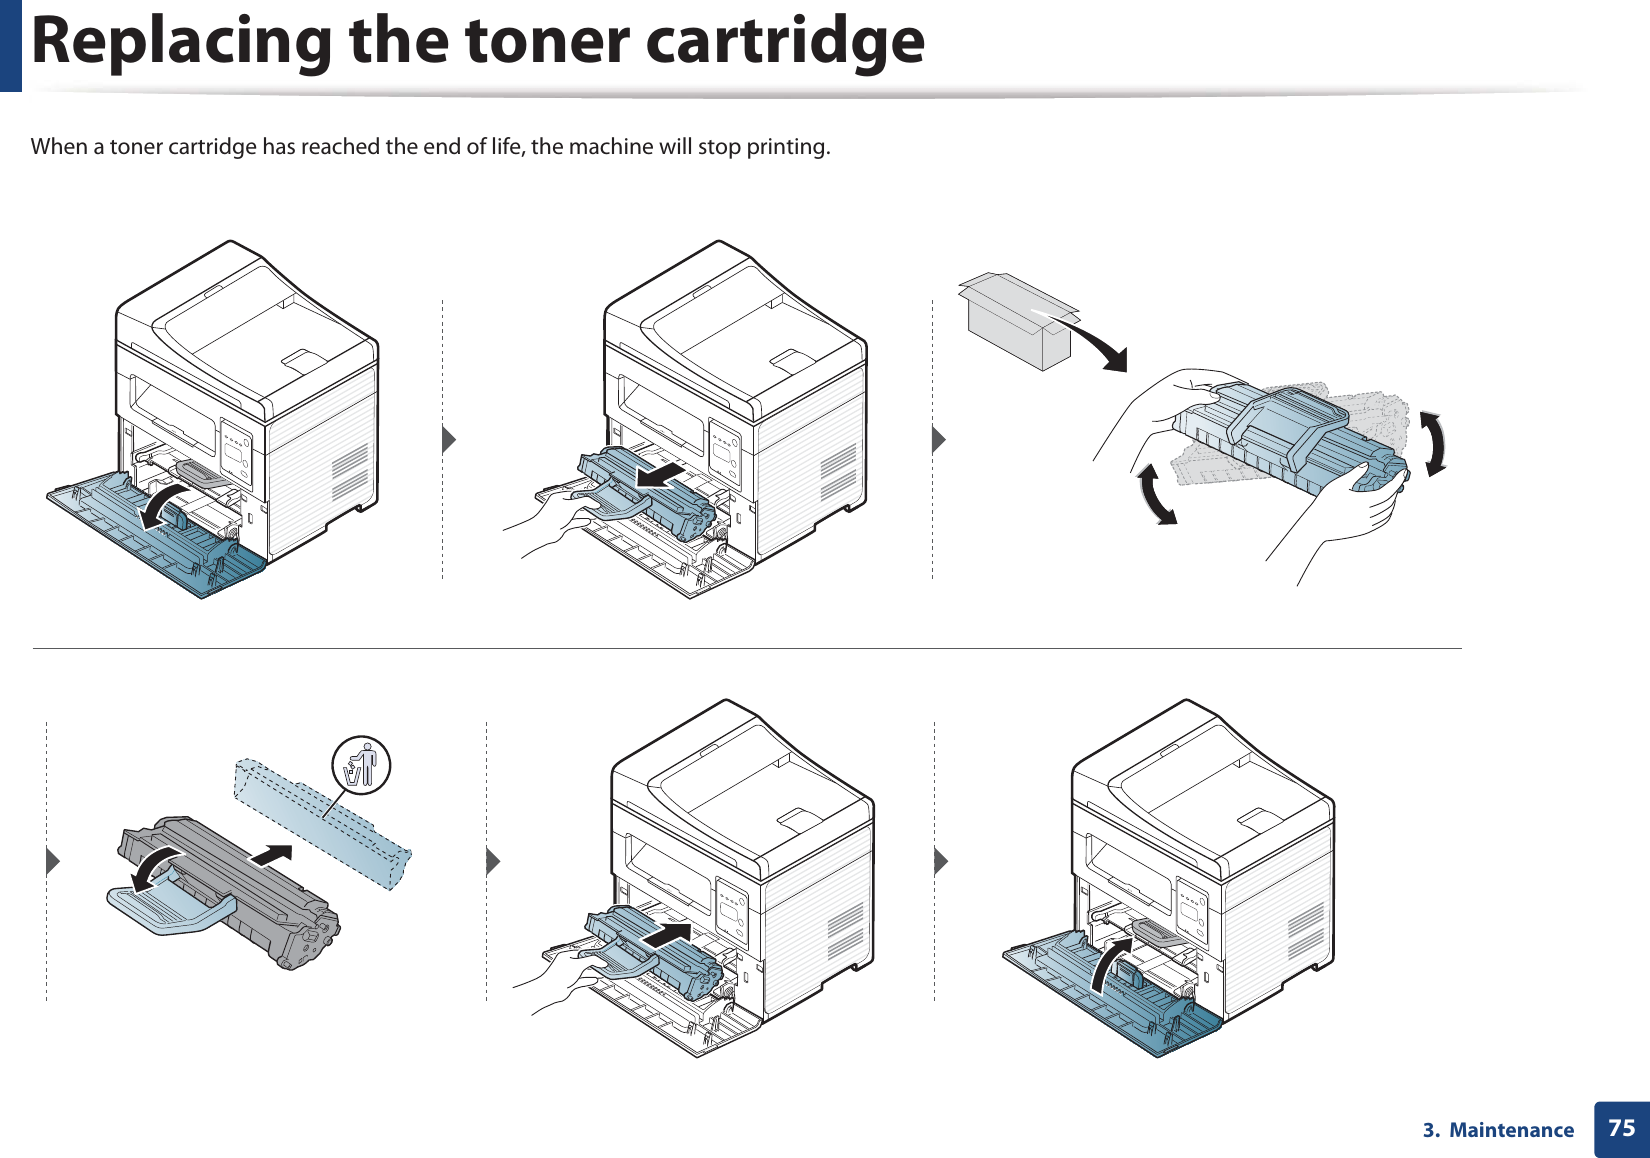 Replacing the toner cartridge753.  MaintenanceWhen a toner cartridge has reached the end of life, the machine will stop printing.